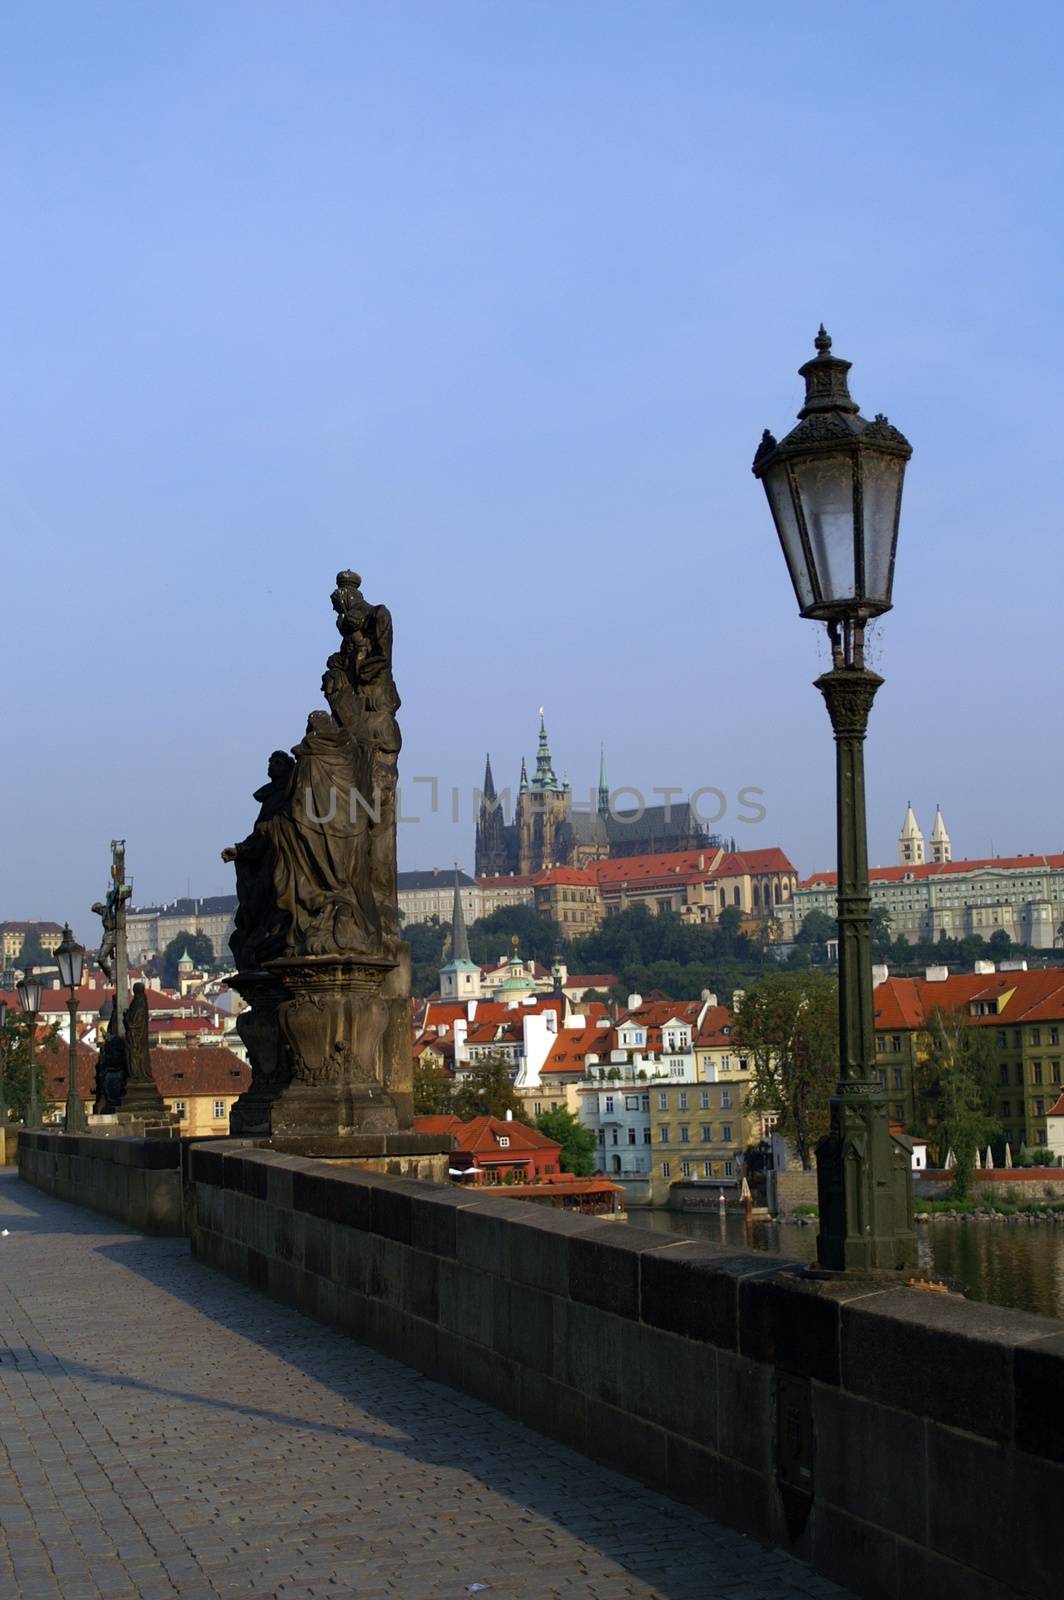 Statues of Charles bridge  and statues - beautiful scene in old prague city